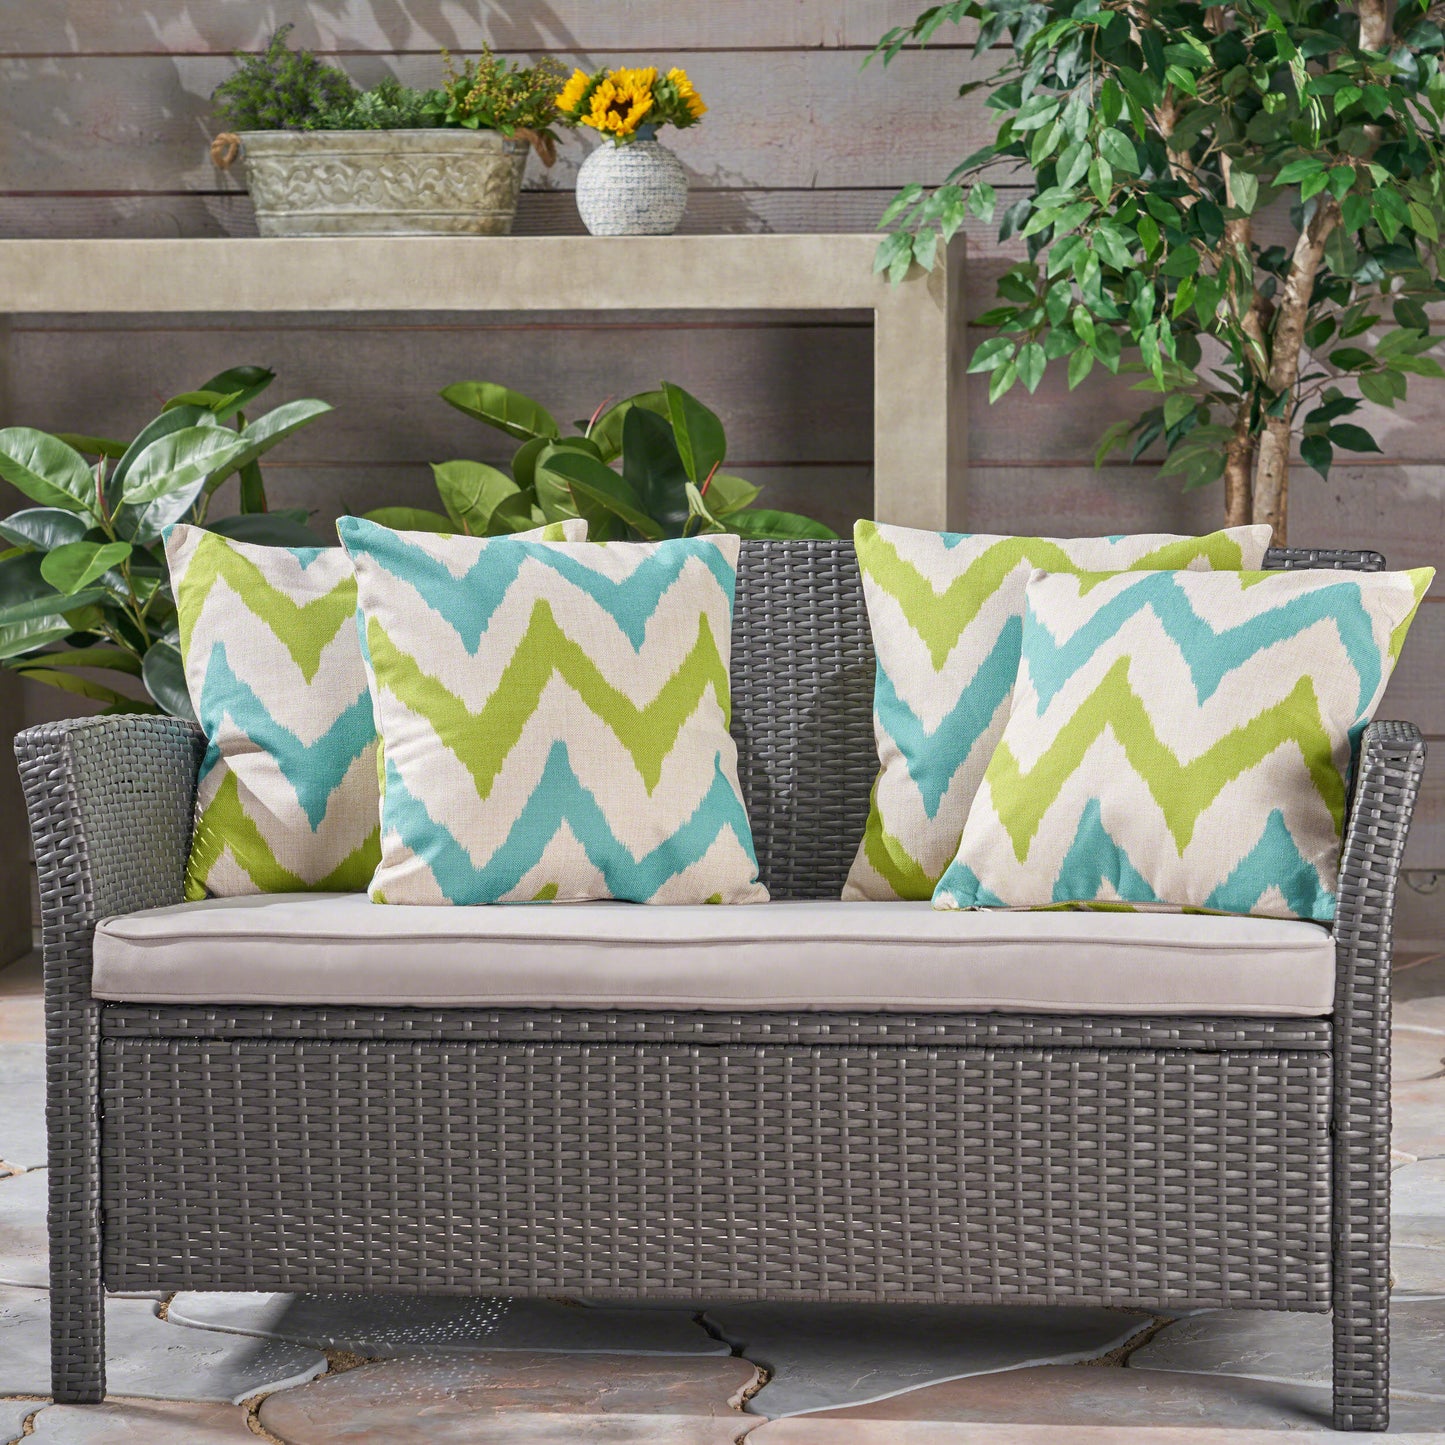 Zora Outdoor 18-inch Water Resistant Square Pillows, Teal and Green